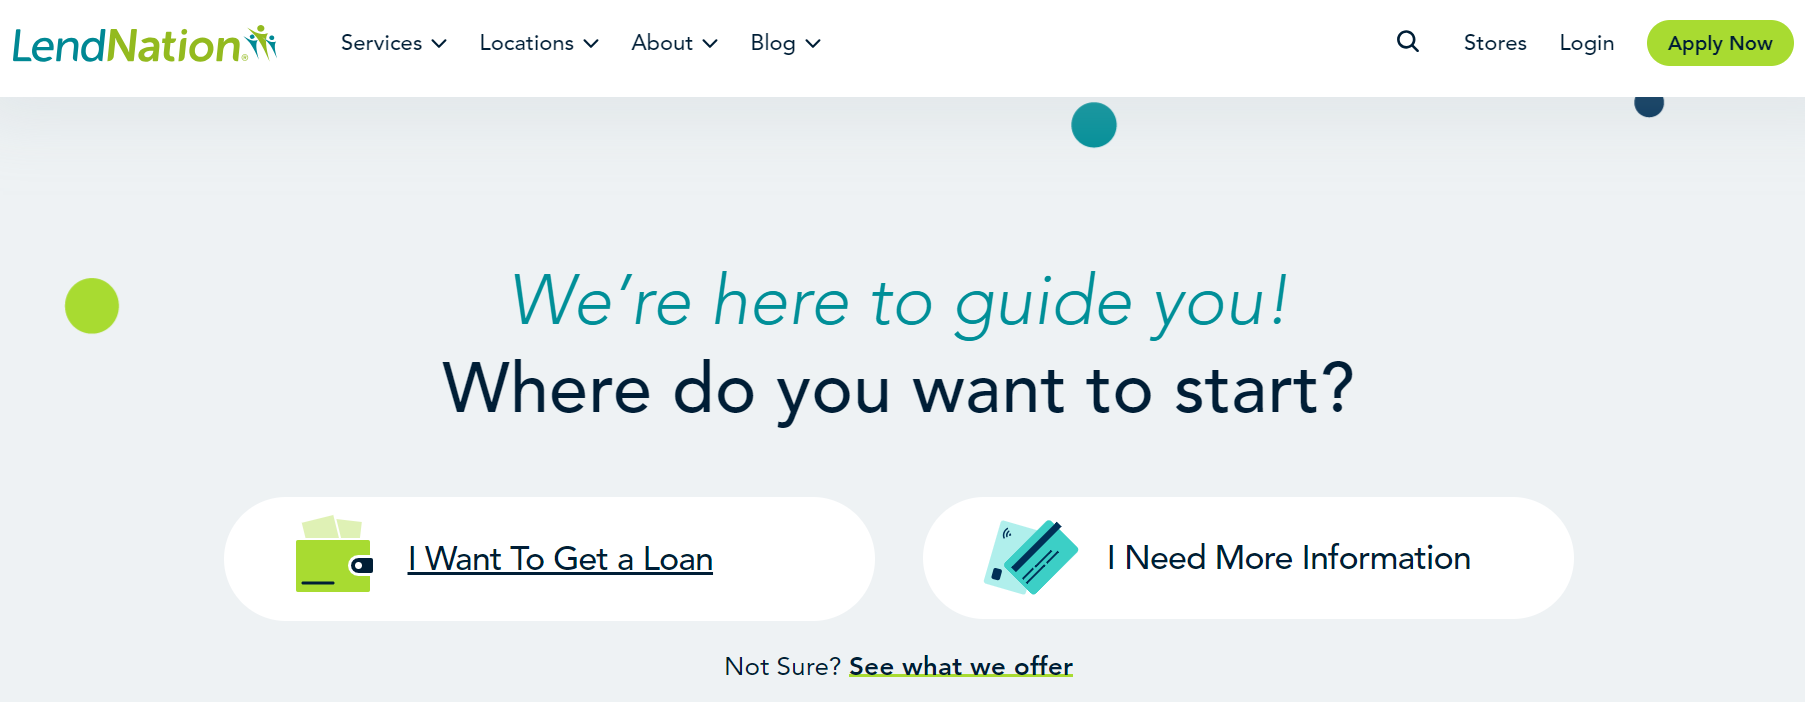 LendNation Loan Review Features, Rates, Requirements, and Customer